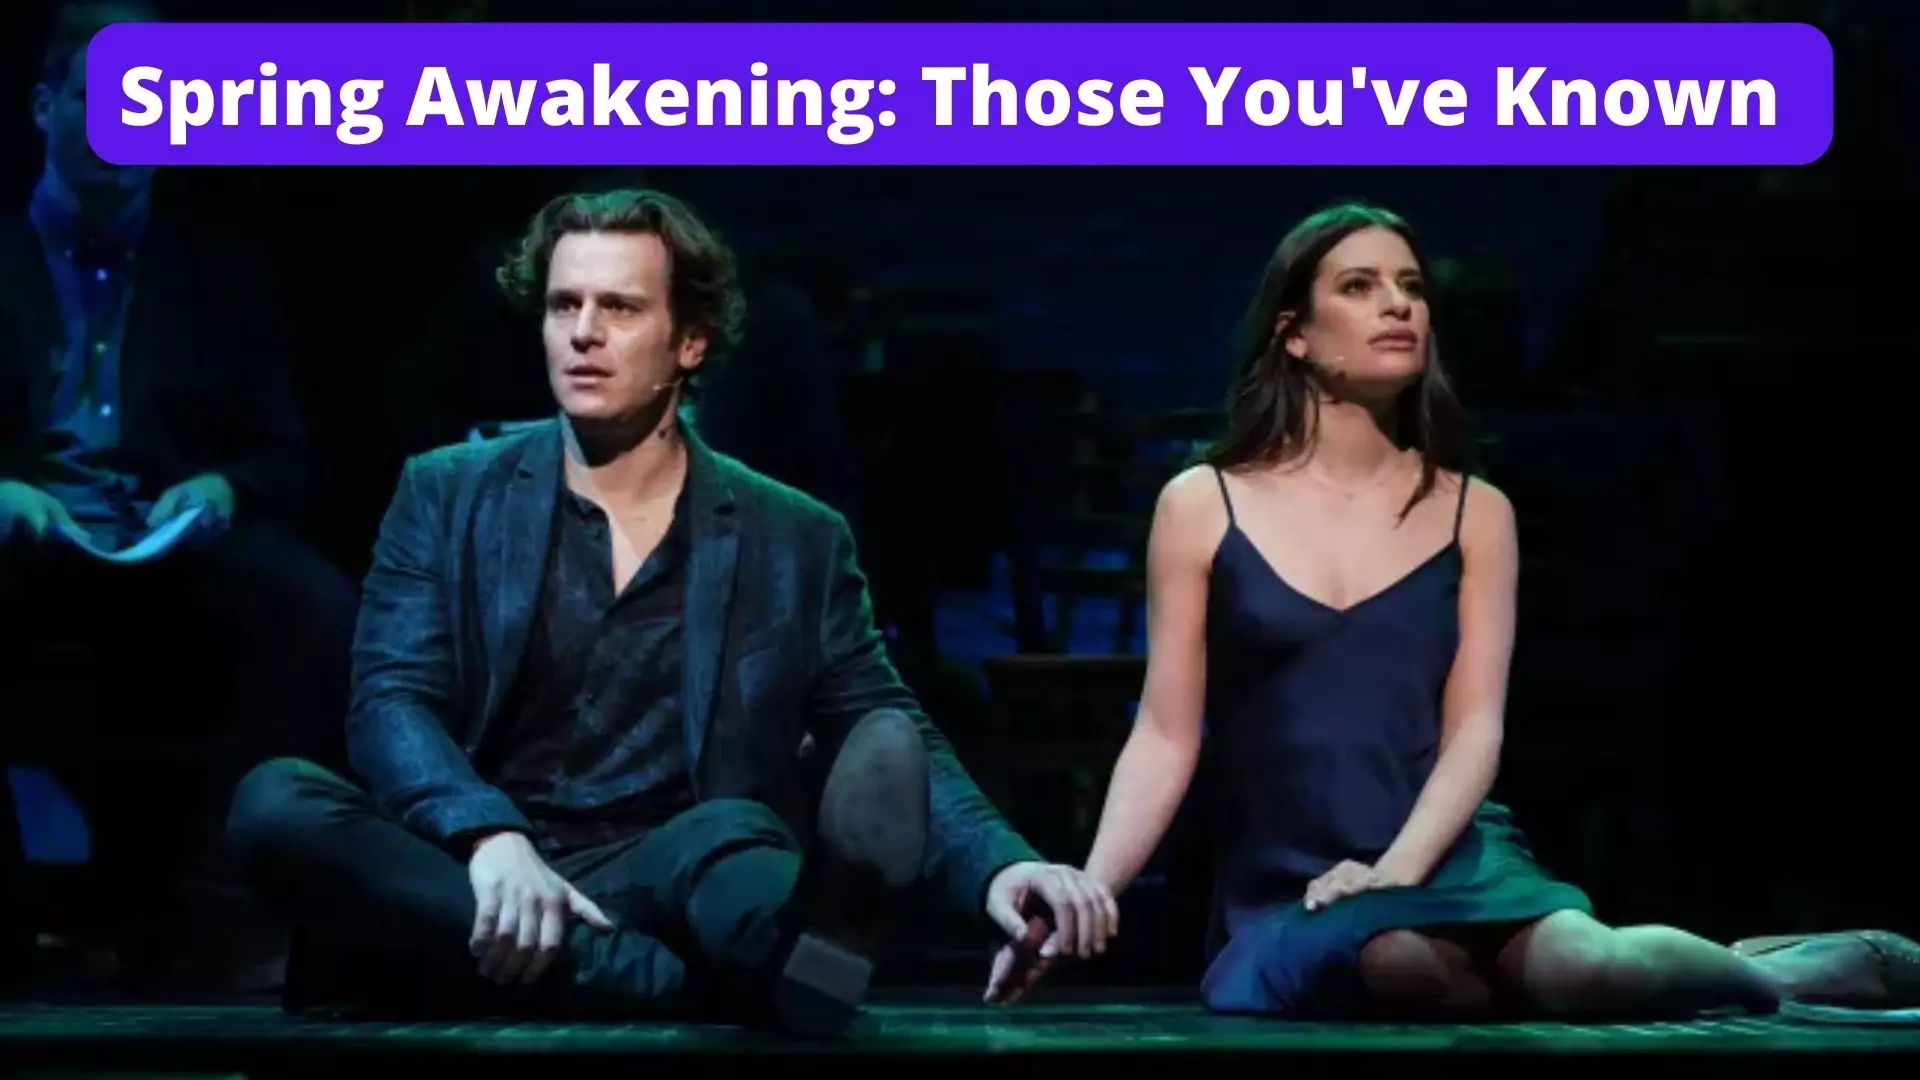 Spring Awakening: Those You've Known Parents Guide and Age Rating | 2022